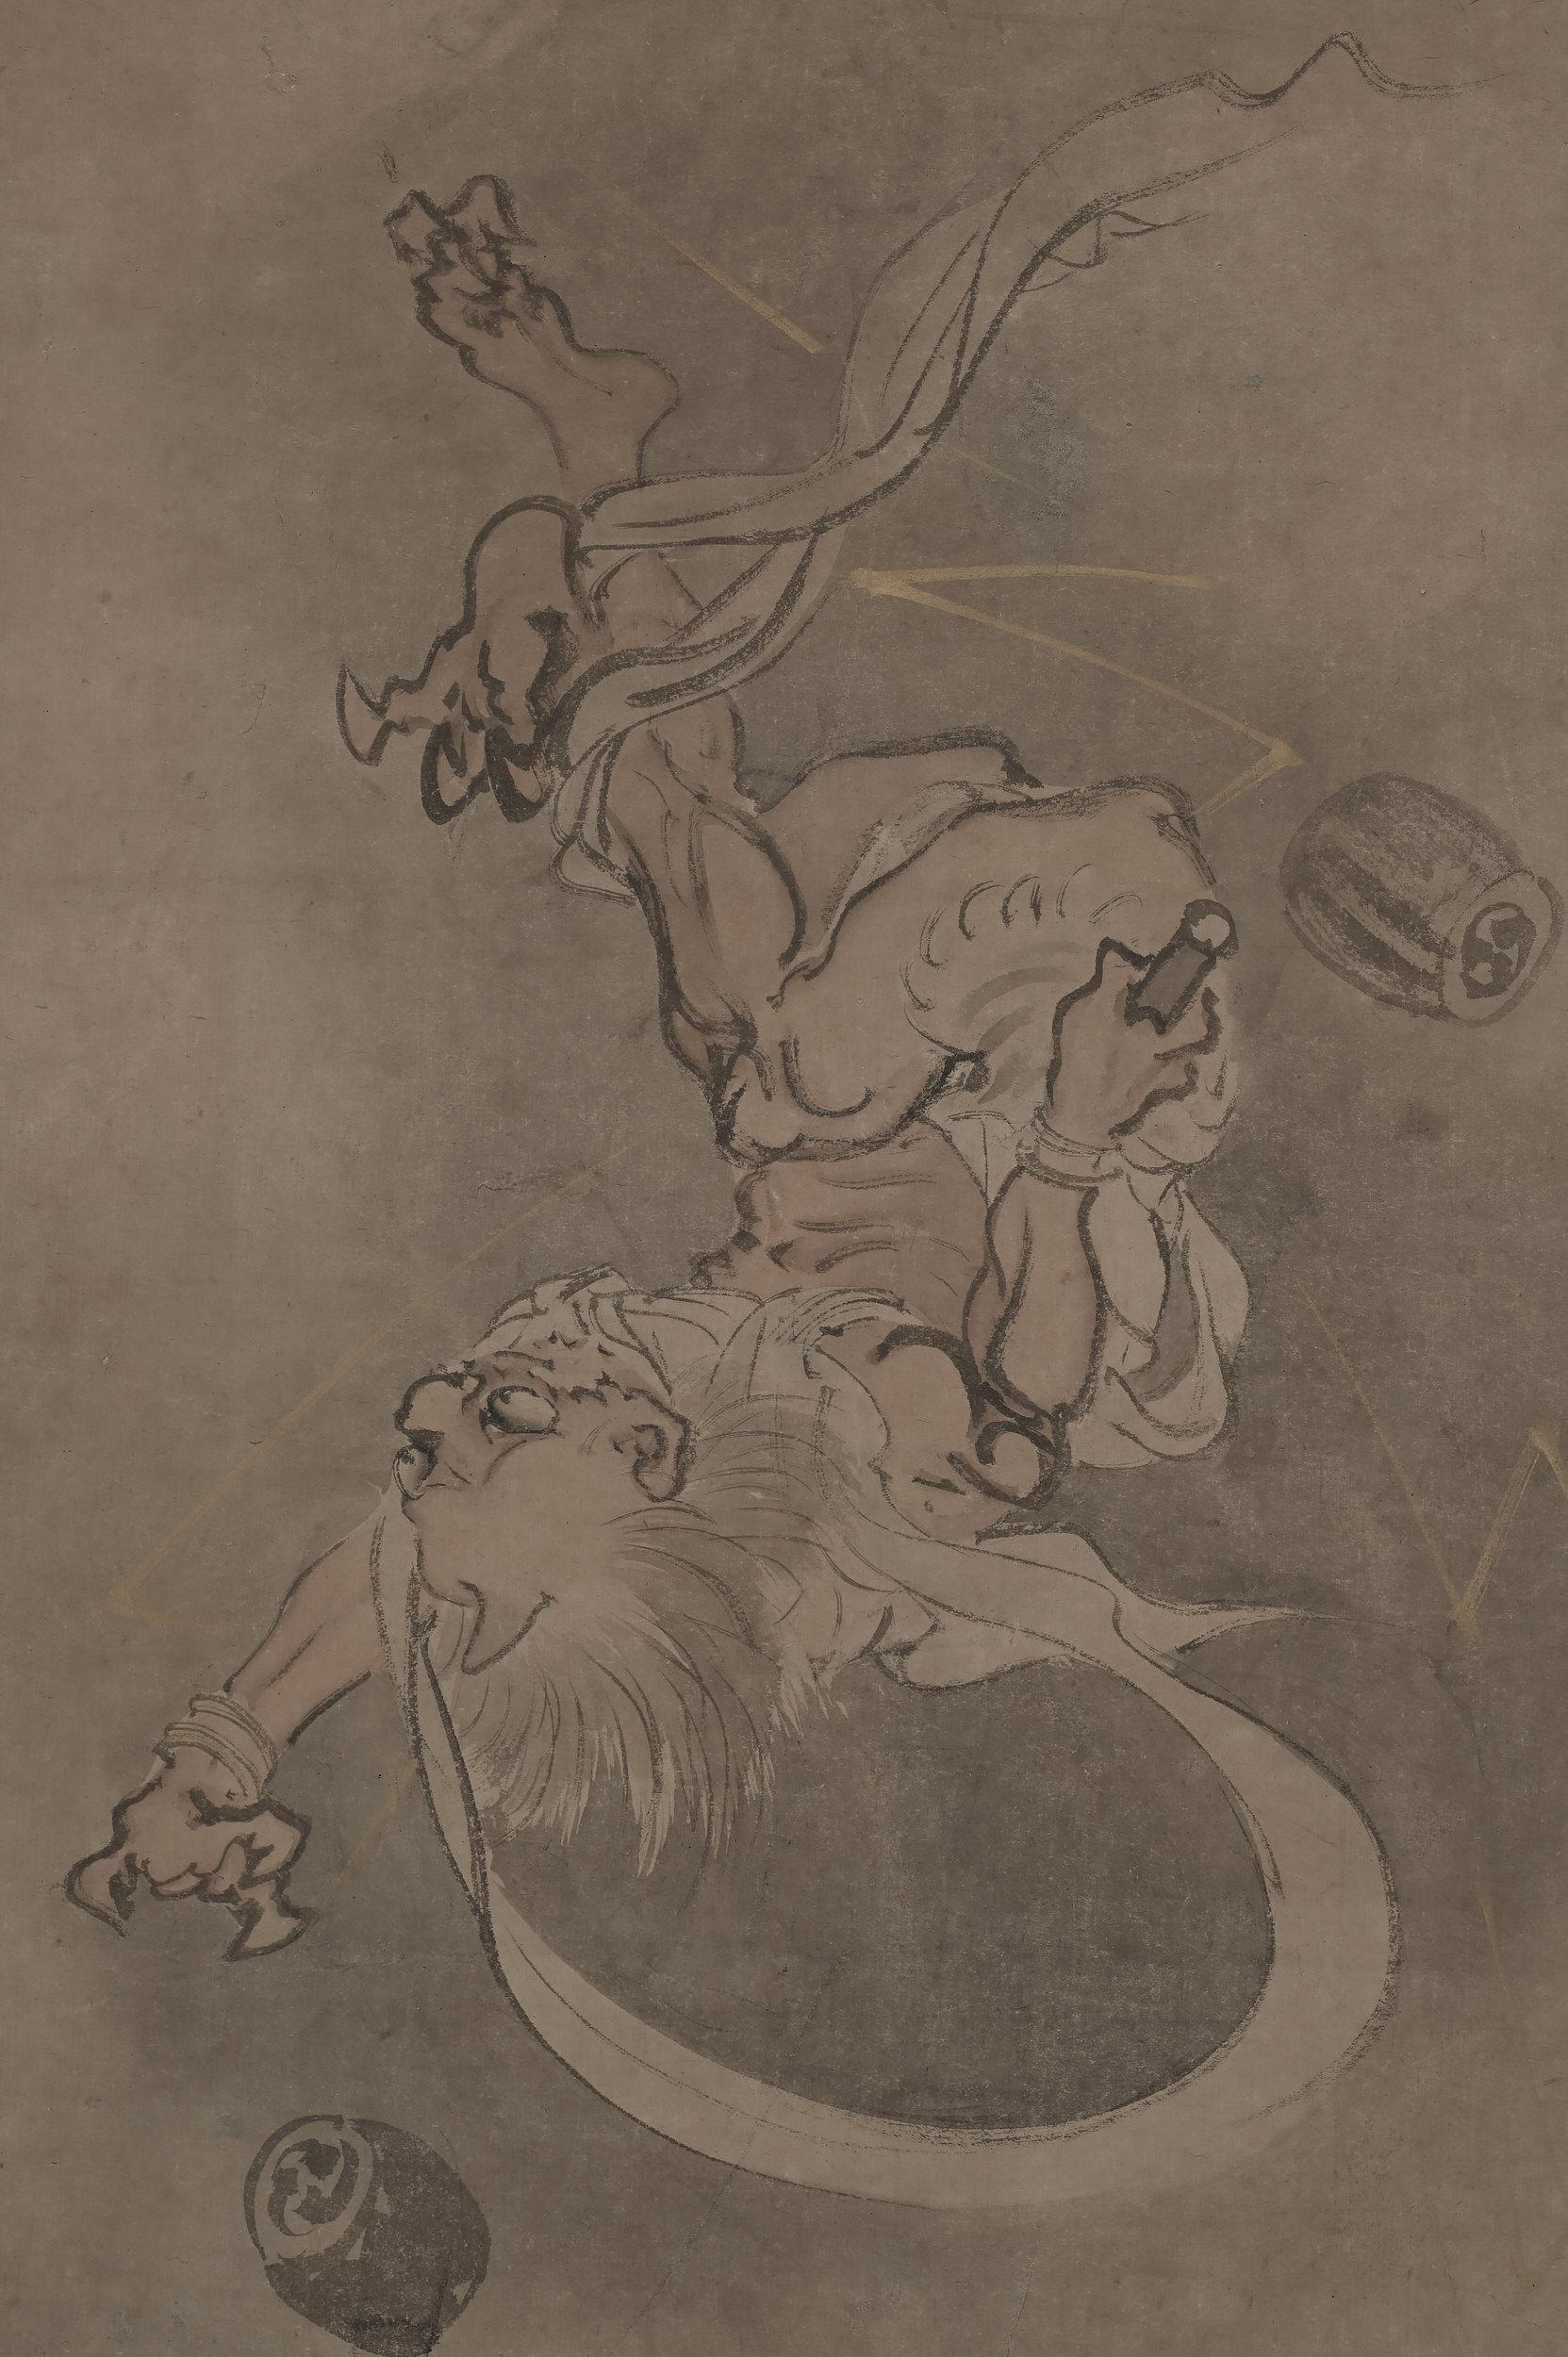 Raijin - God of Thunder

Yamaguchi Soken (1759-1818)

Mid to Late Edo period, circa 1800.

Framed painting. Ink and light color on paper.

This humorous painting depicts the Thunder God, Raijin, tumbling from the sky, presumably being struck